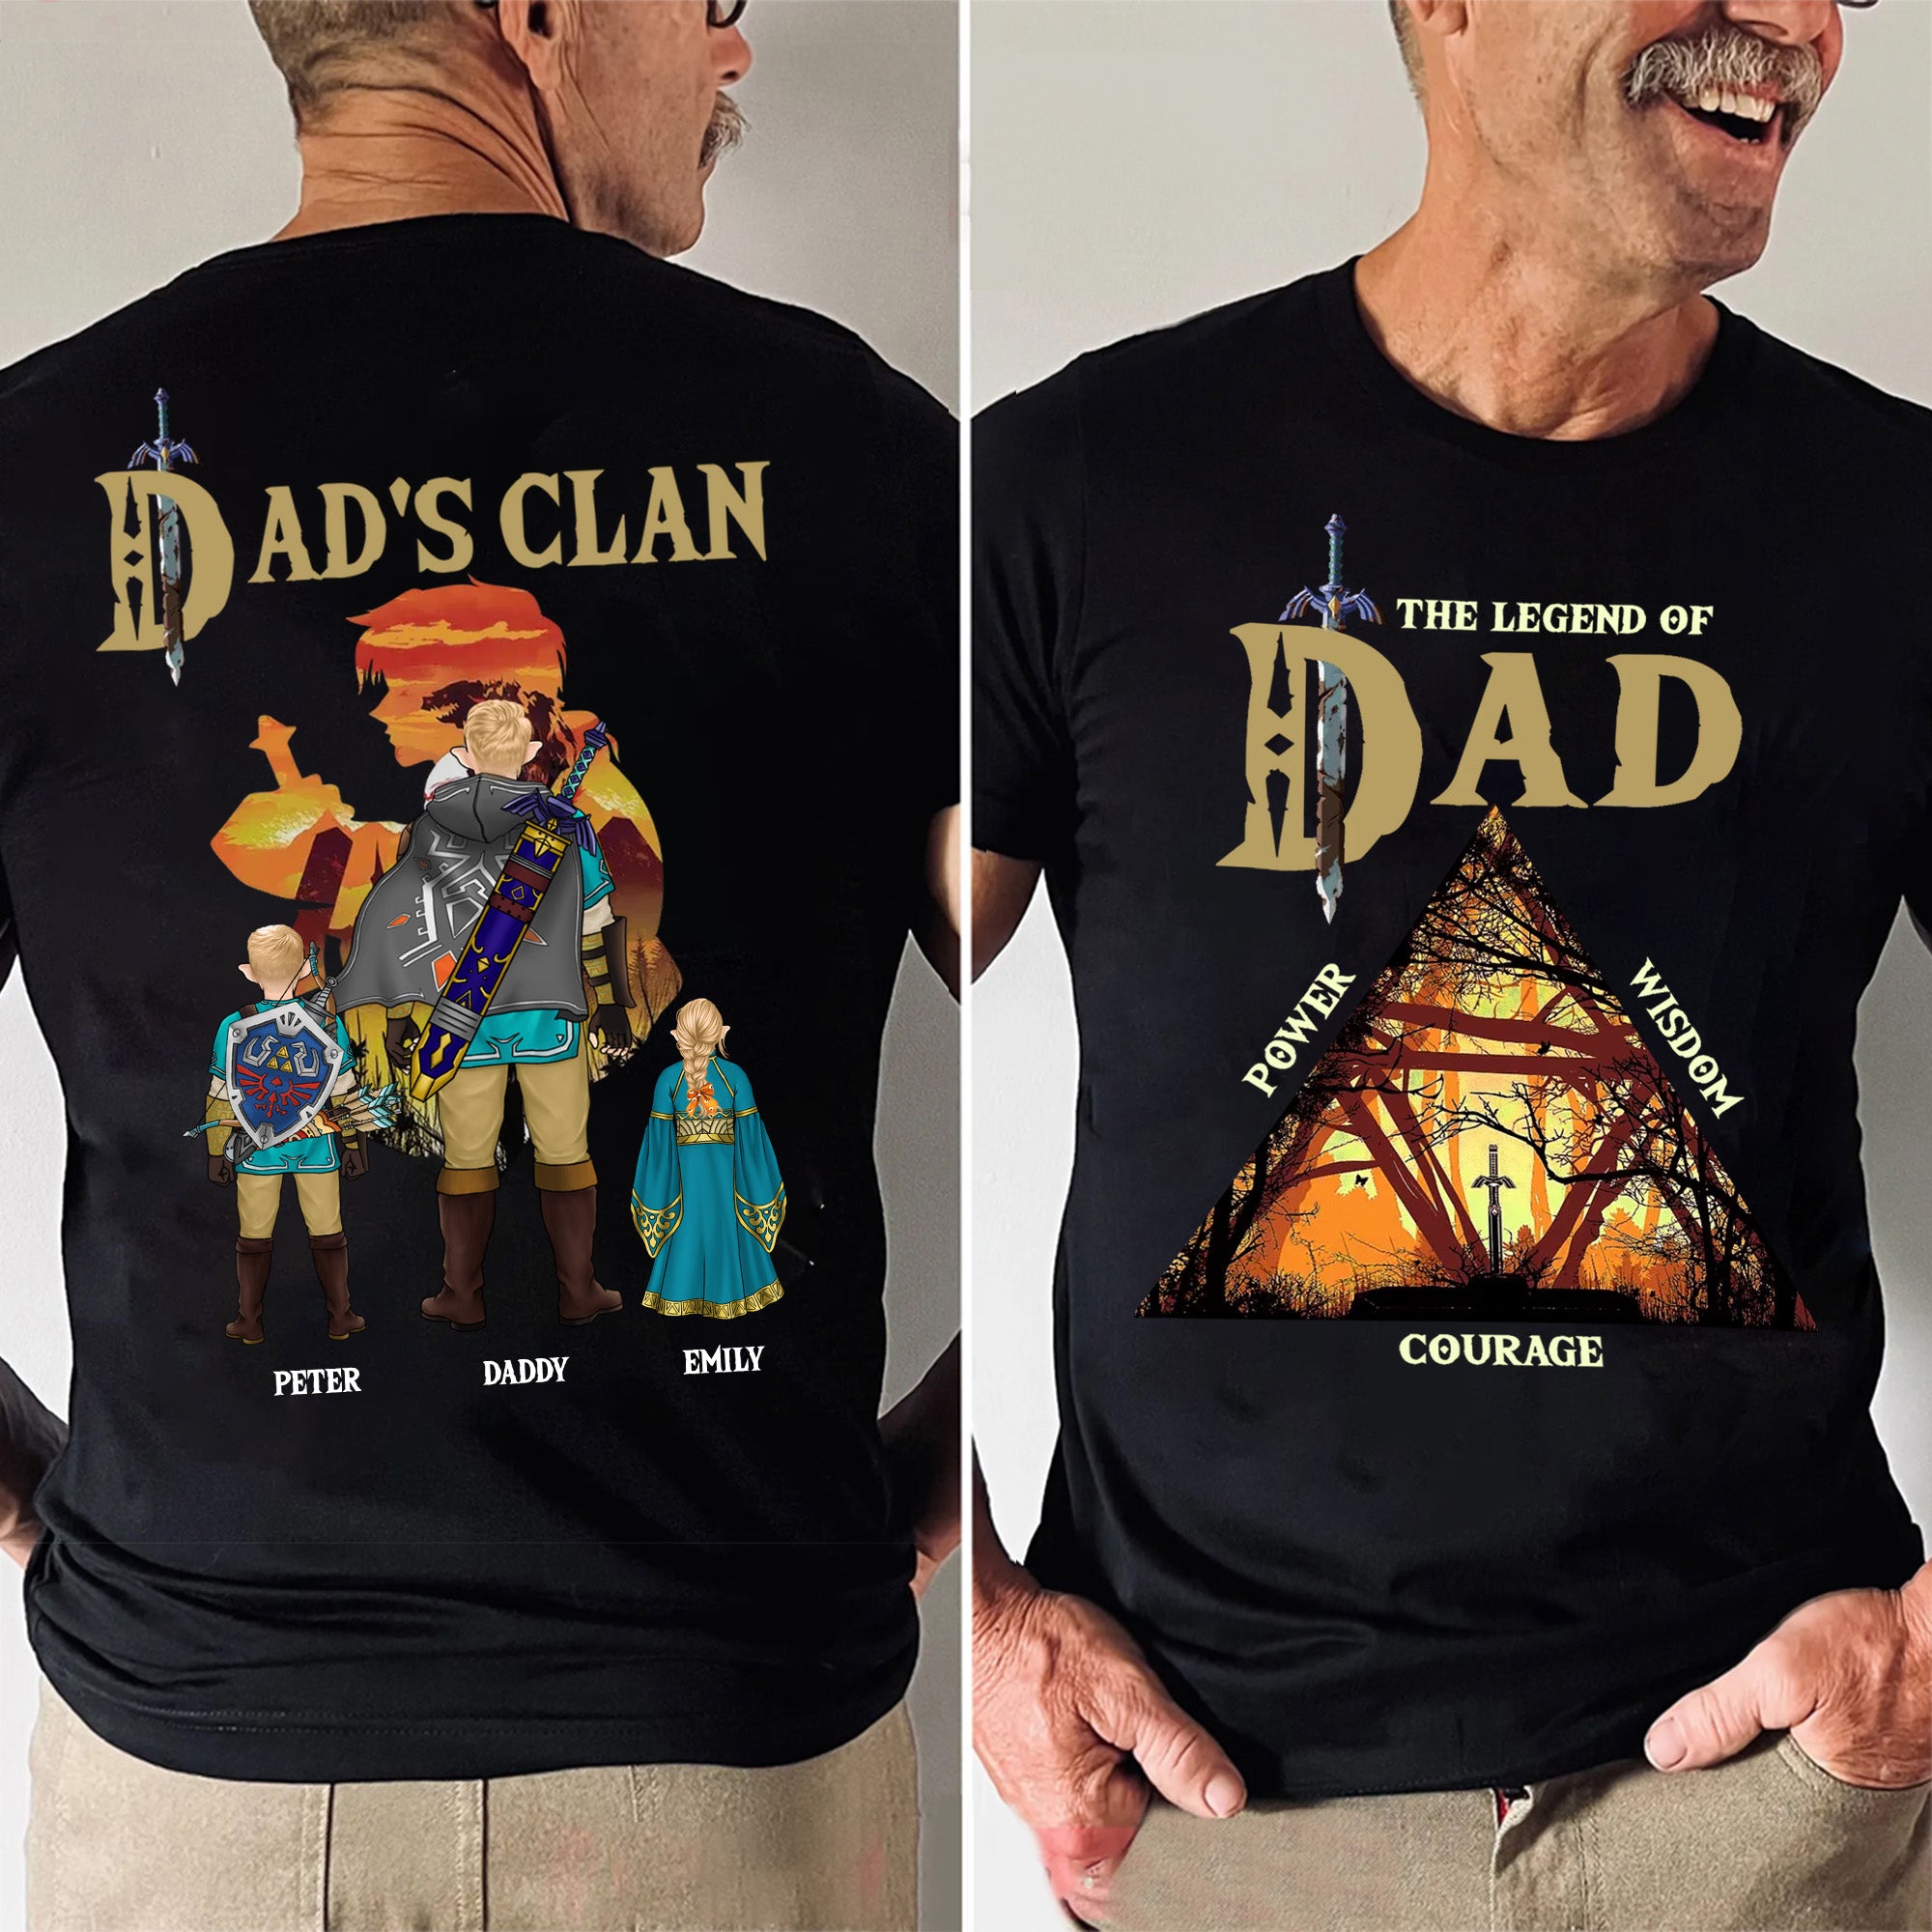 The Legend Of Dad Power, Wisdom, Courage - Gift For Father's Day - Personalized TShirt